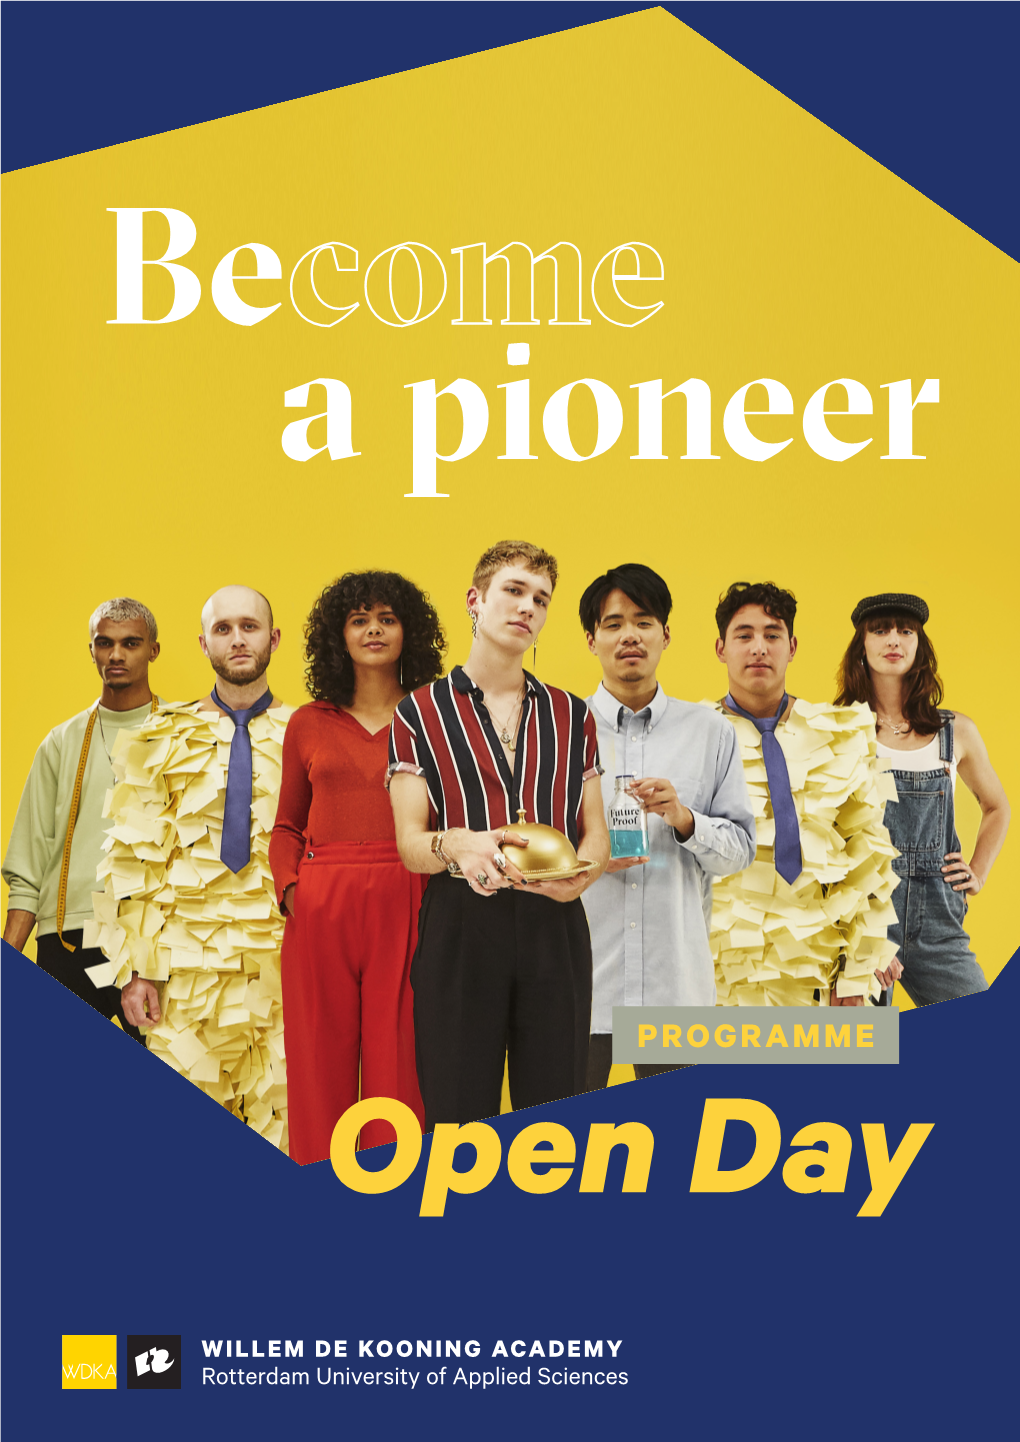 PROGRAMME Open Day